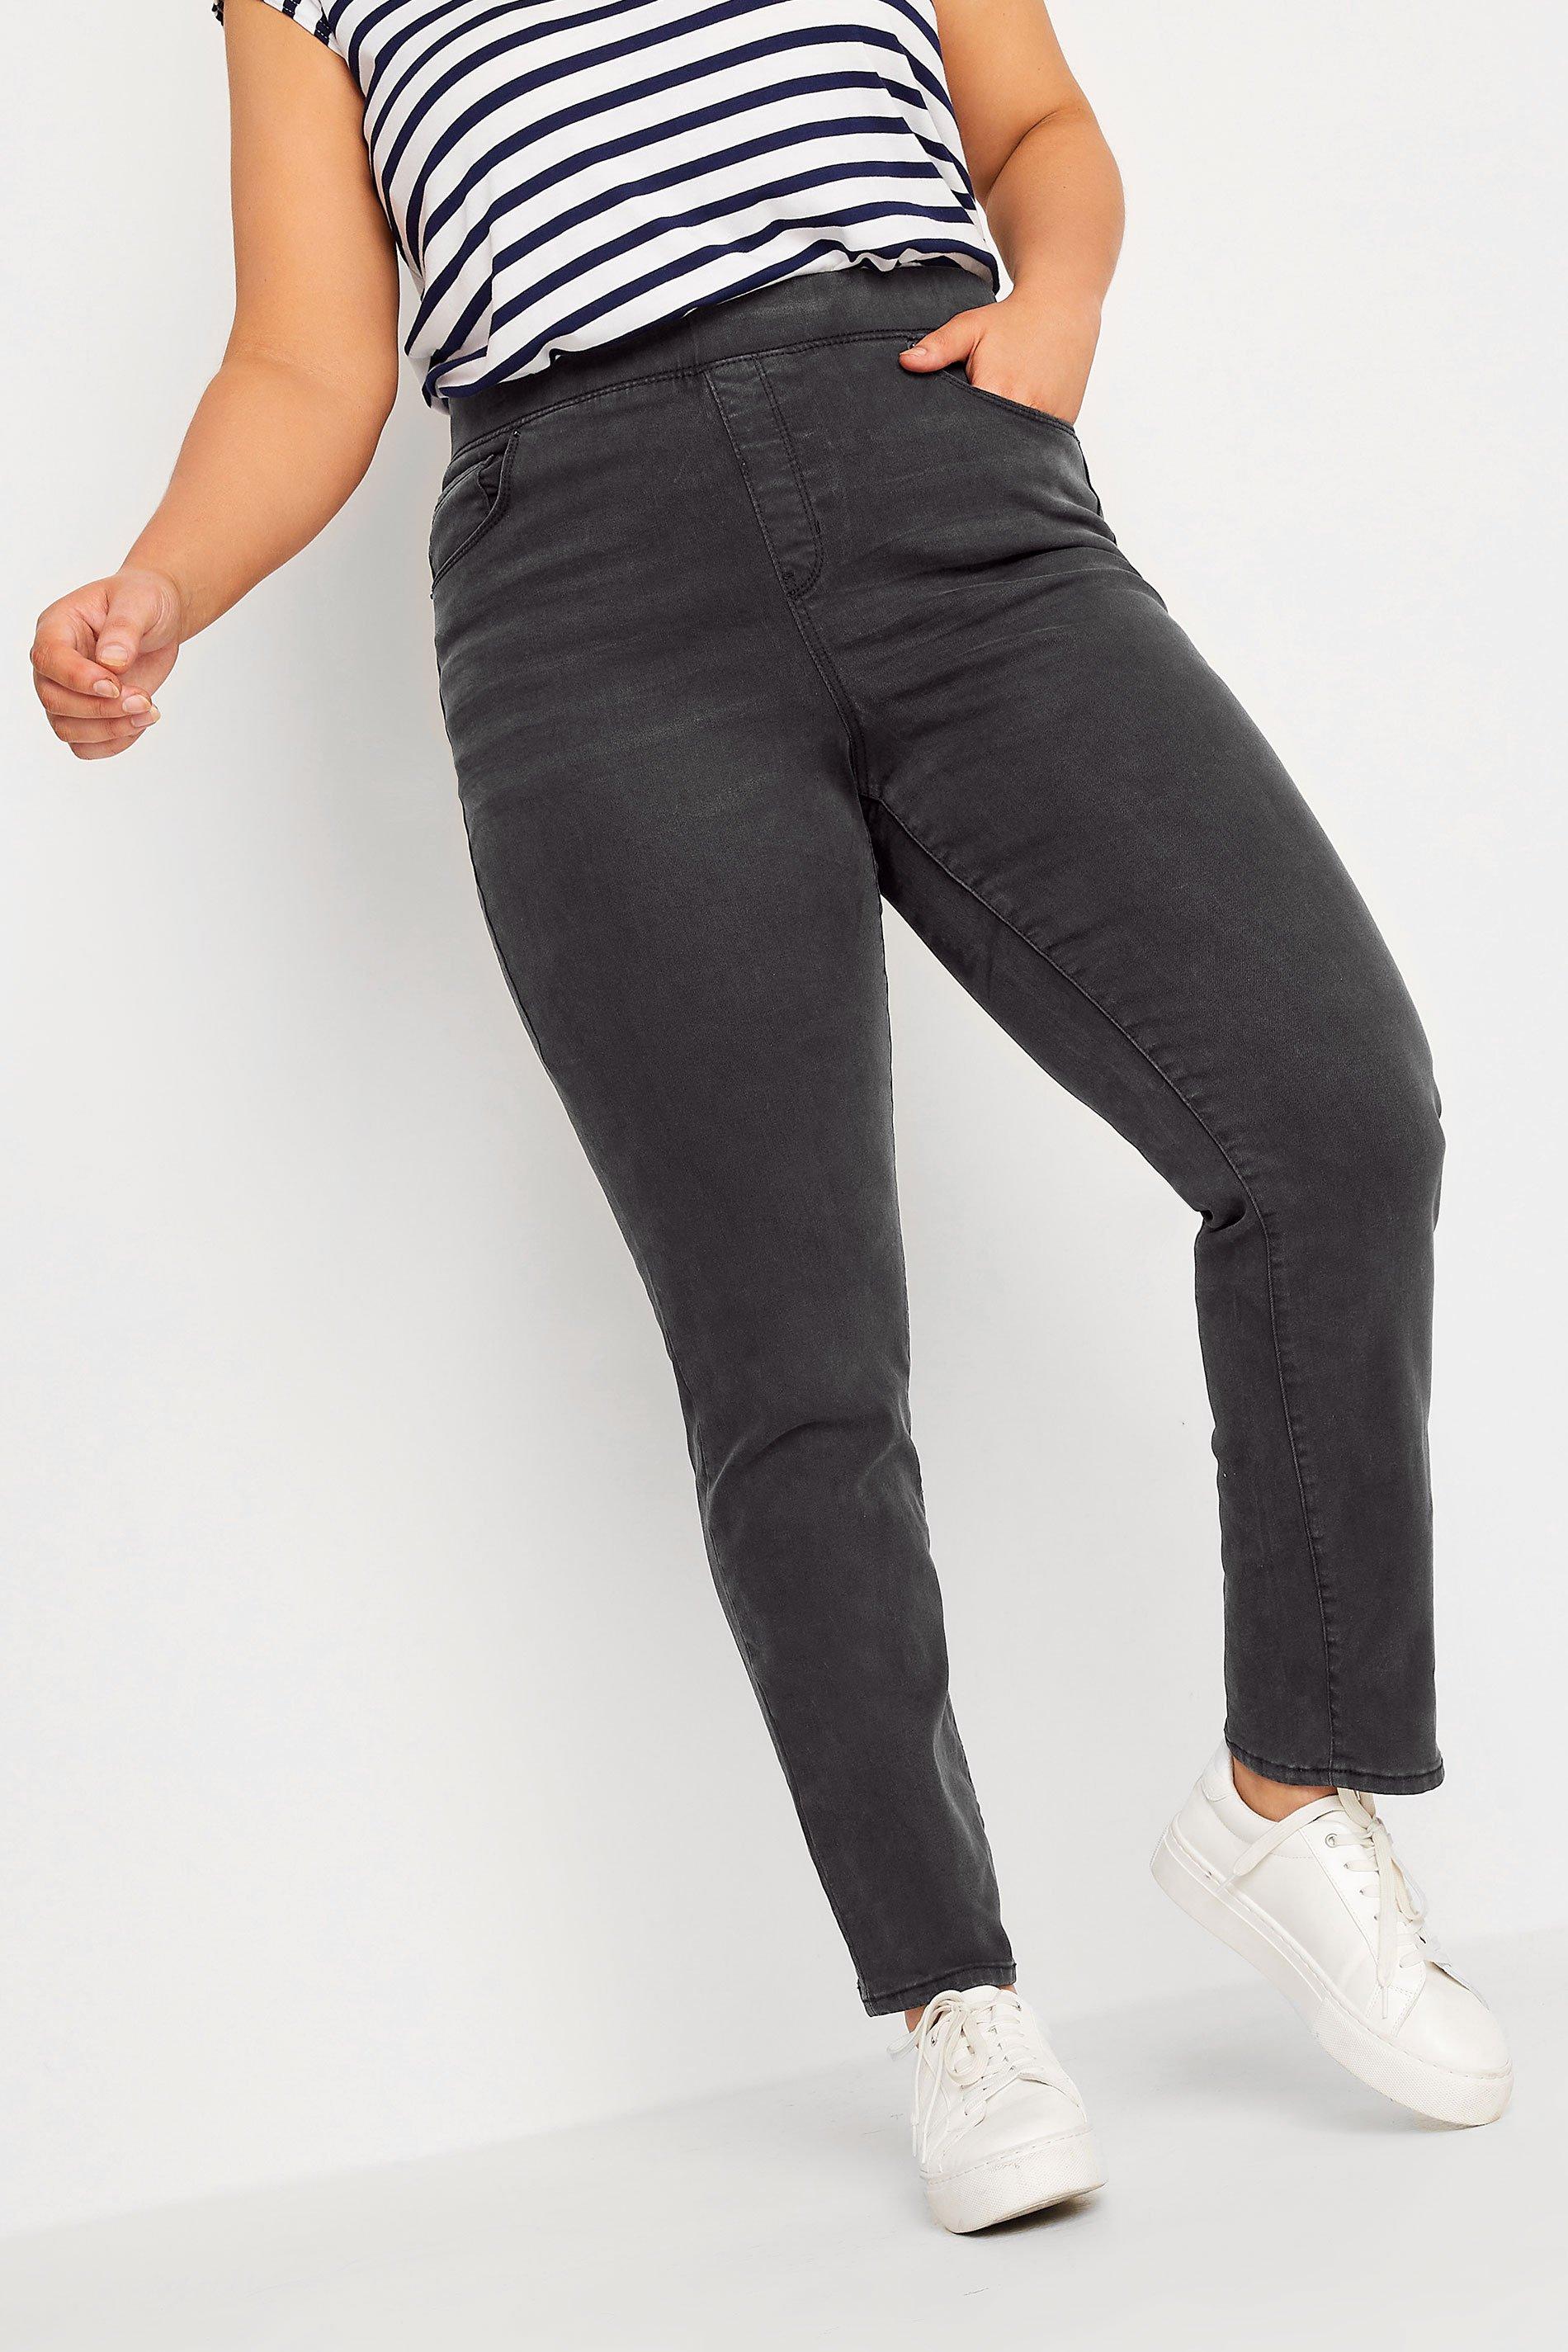 Yours for Good Curve Indigo Distressed Cat Scratch Stretch Jenny Jeggings -  Women's : : Fashion